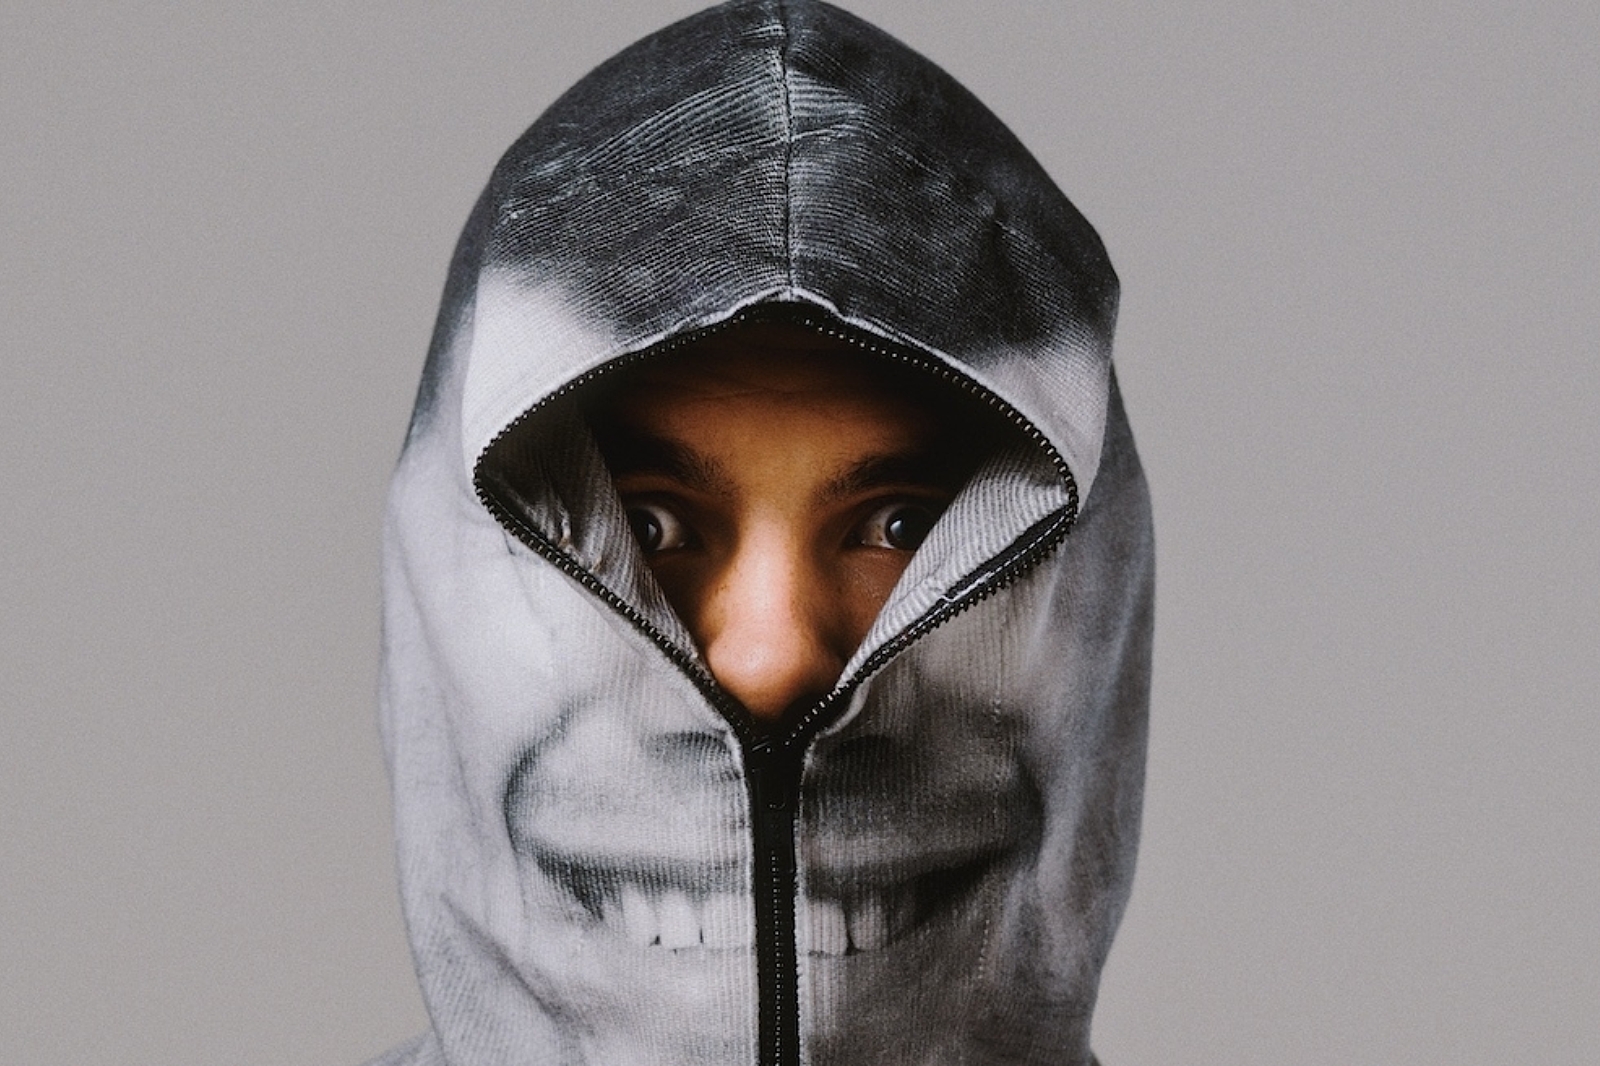 Tracks: slowthai, Dream Wife, Stormzy and more